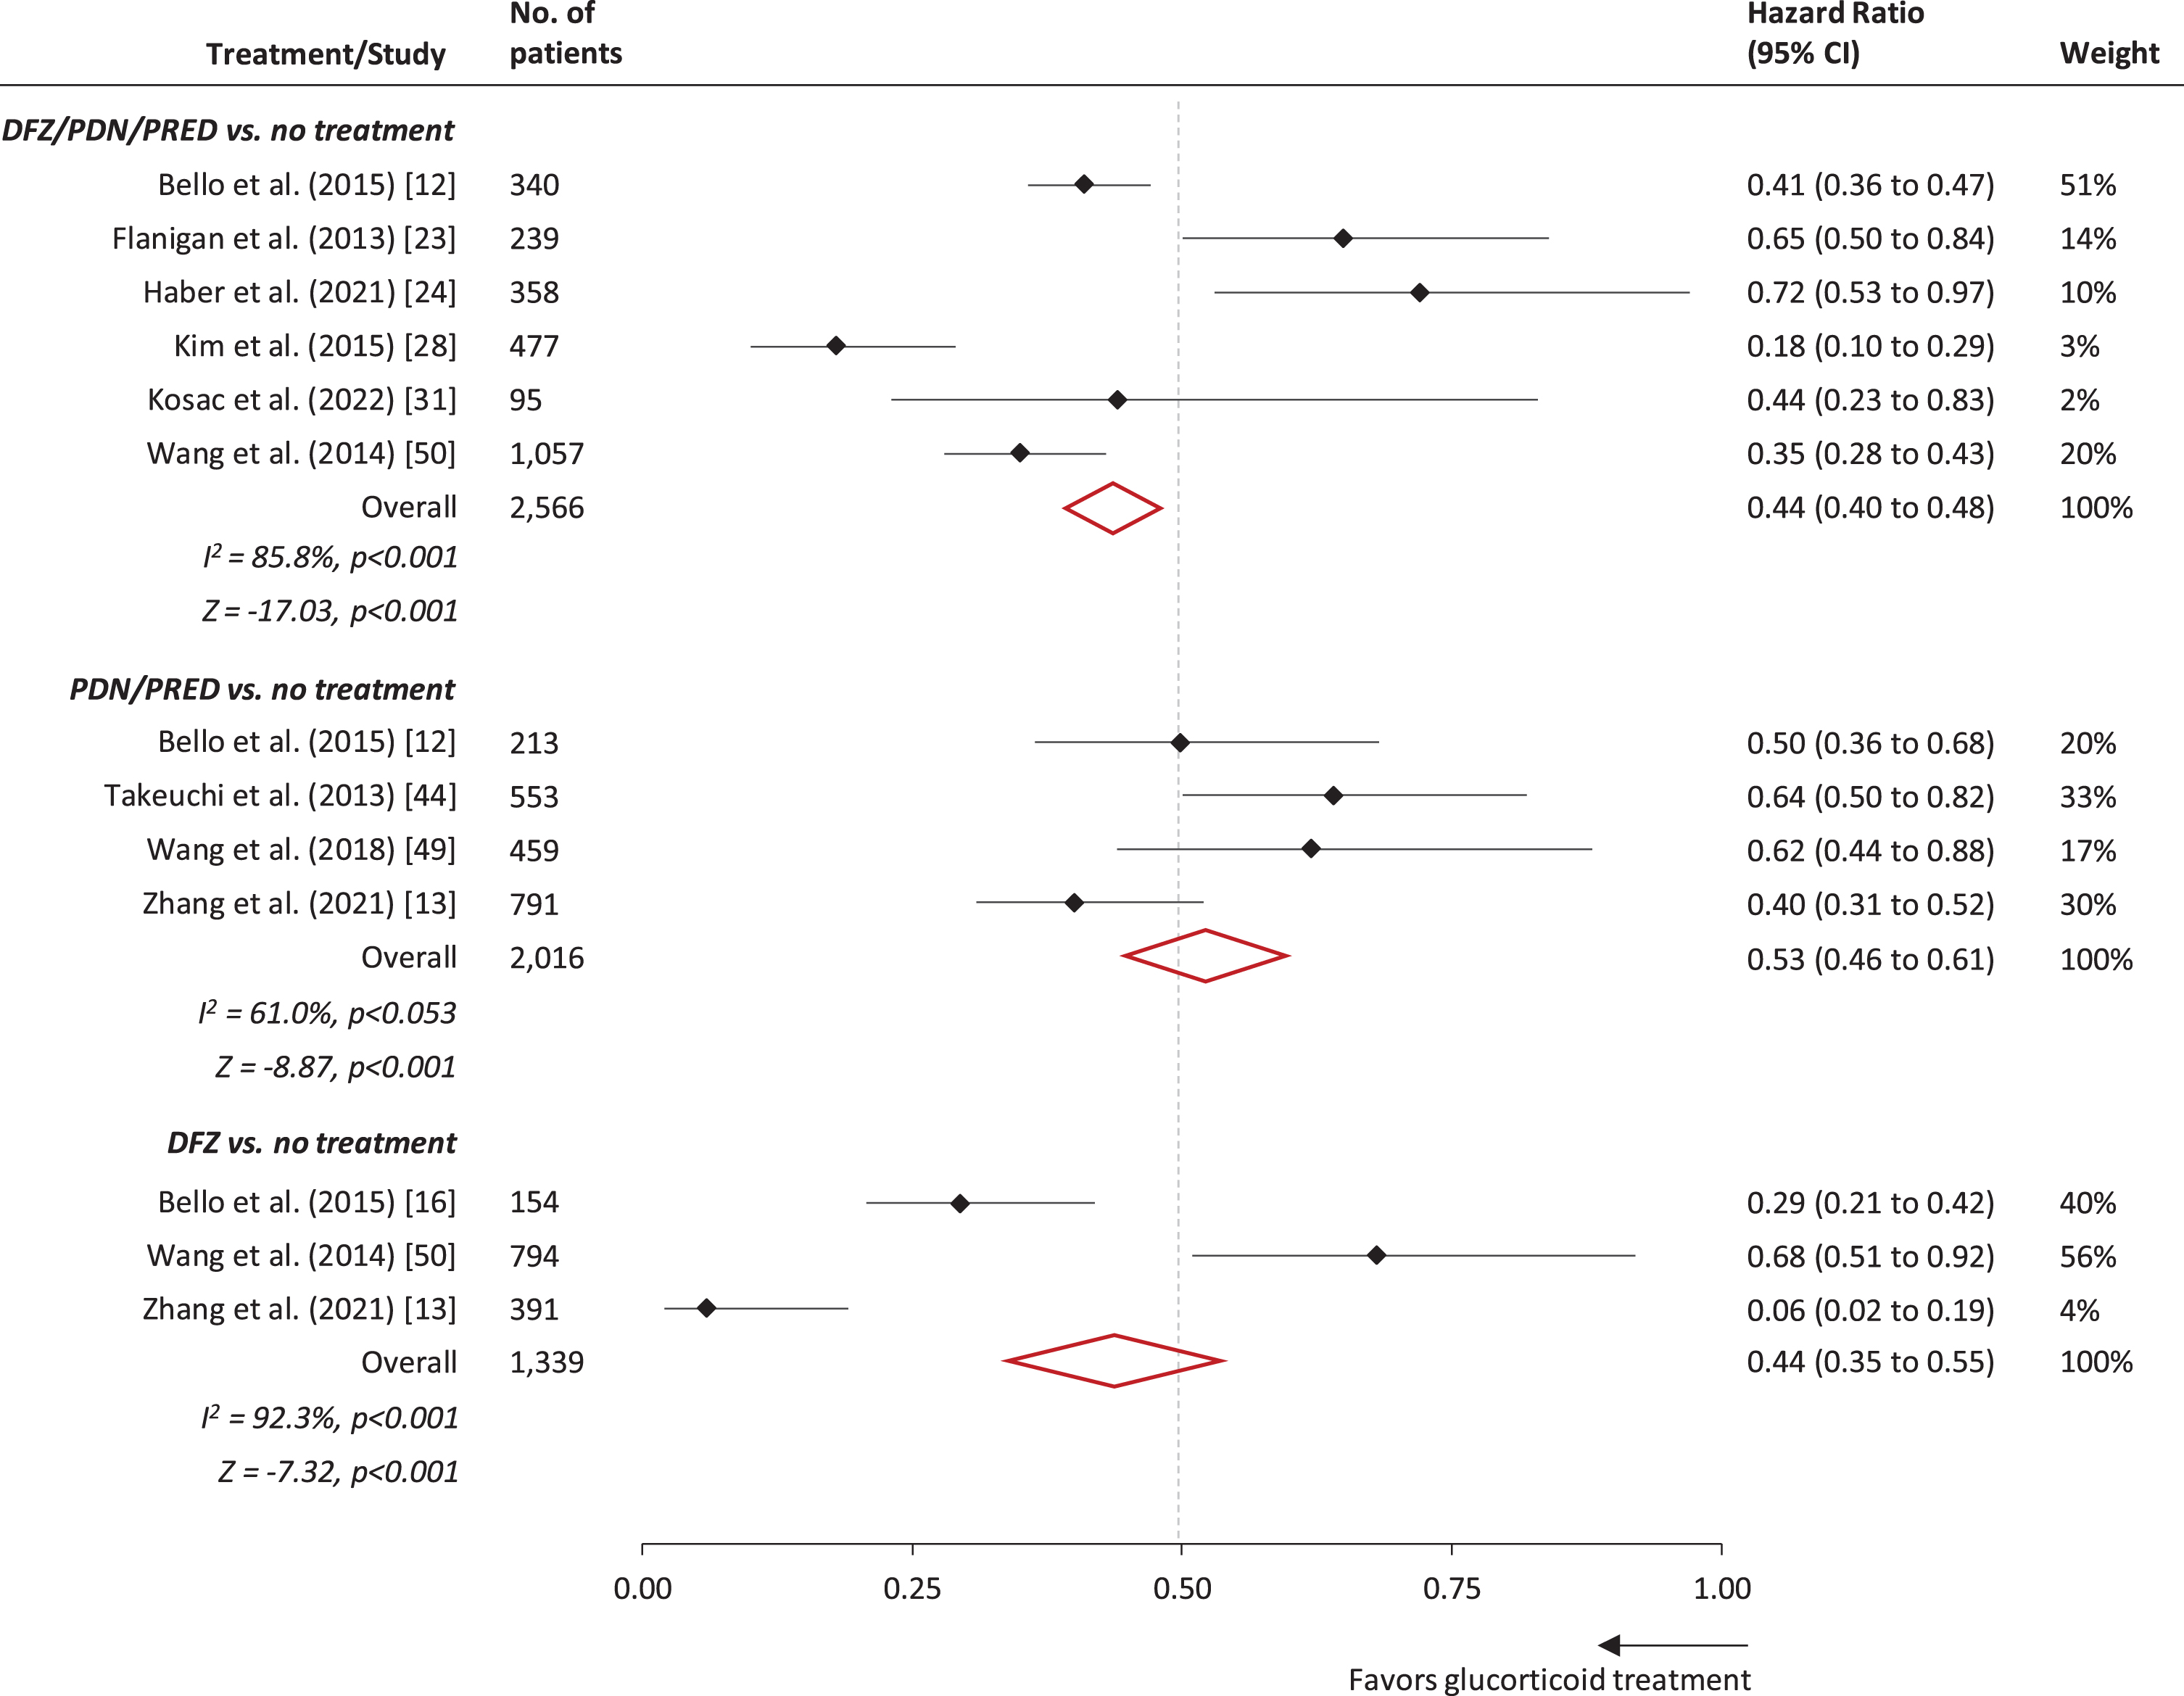 Forest plot of treatment effect of glucocorticoids on loss of ambulation in patients with DMD. Note: Estimates from Bello et al. [16], Bello et al. [17], and Wang et al. [48] were excluded from the meta-analysis as their respective patient cohorts were represented in other included studies of larger sample size (in some cases within treatment strata). Confidence interval (CI). Deflazacort (DFZ). Prednisolone (PRED). Prednisone (PDN).